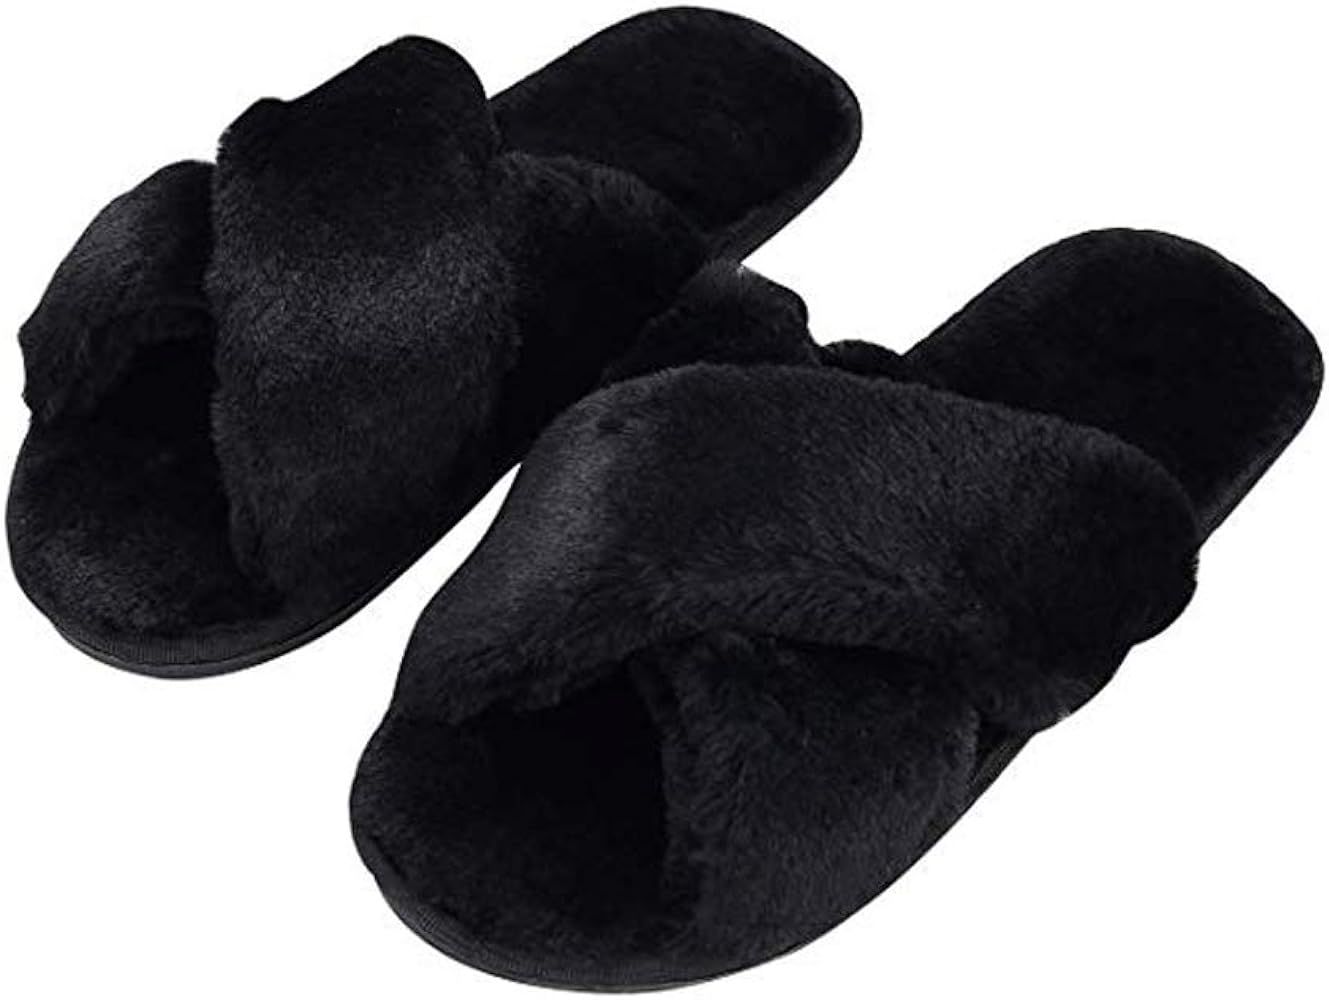 Womens Faux Fur Slippers Warm Fussy Flip Flop House Slippers Open Toe Home Slippers for Girls Men | Amazon (US)